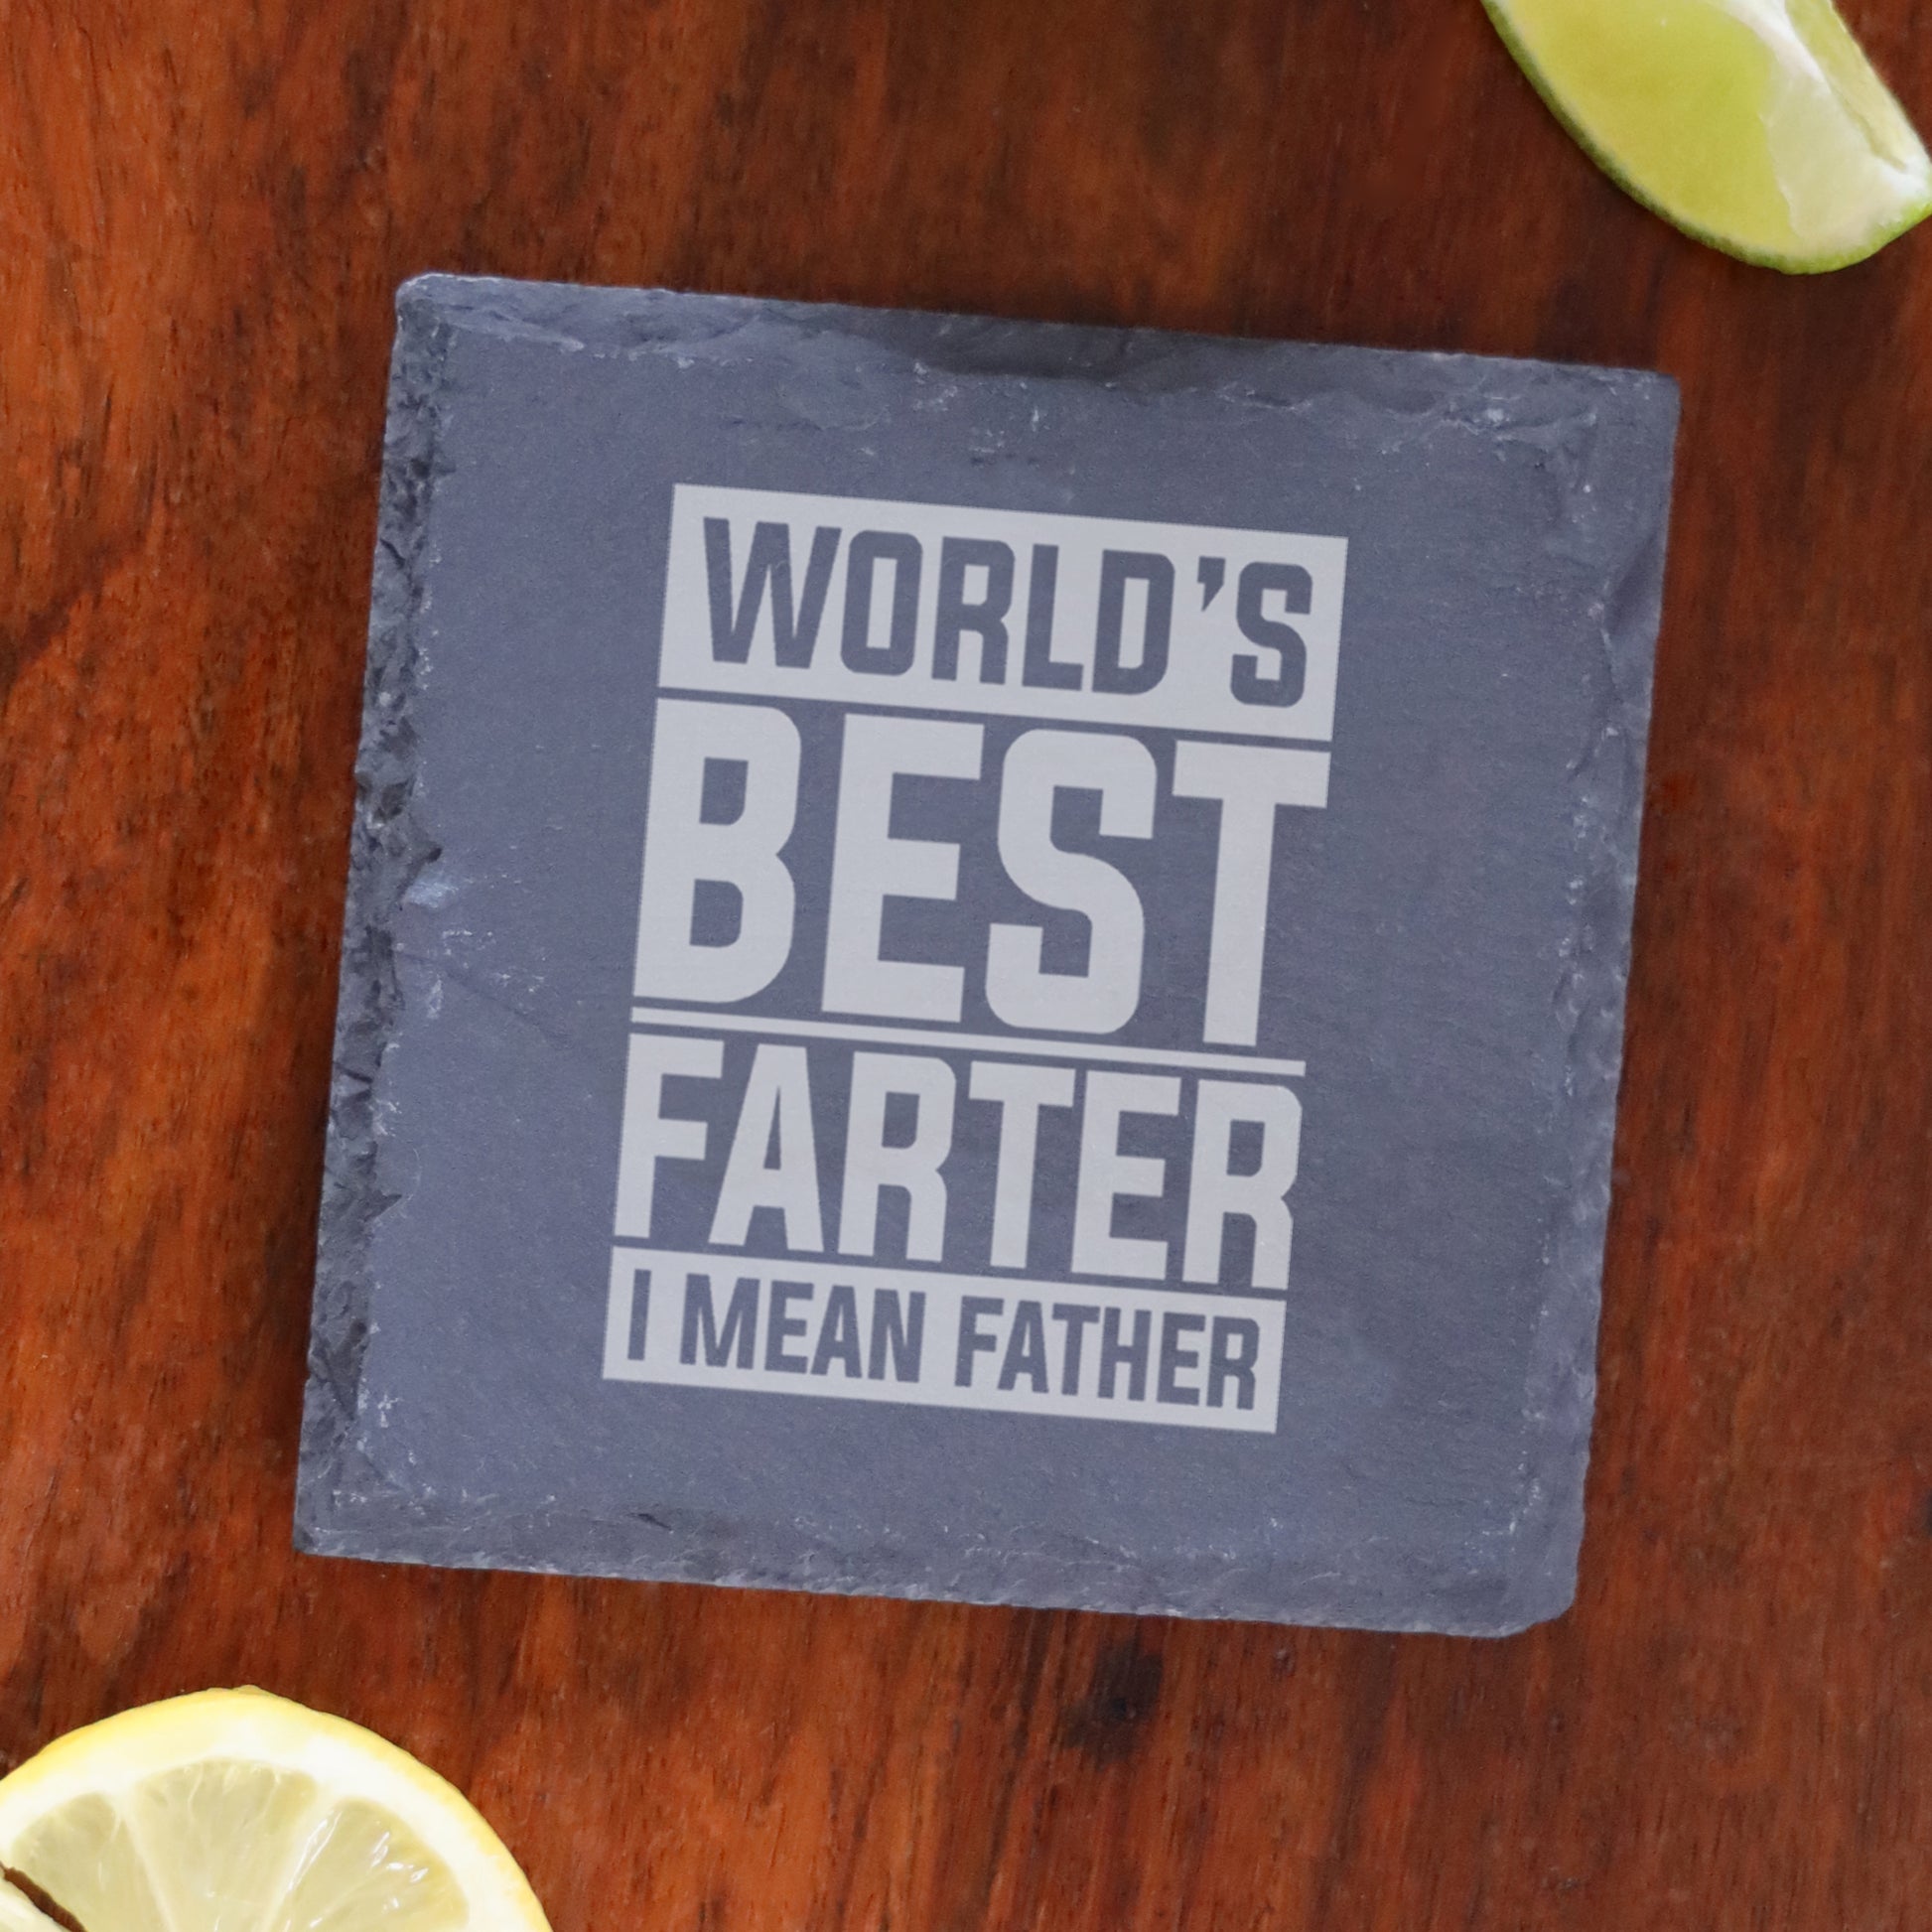 "Worlds Best Farter I Mean Father" Novelty Engraved Wine Glass and/or Coaster Set  - Always Looking Good - Square Coaster Only Square Design 